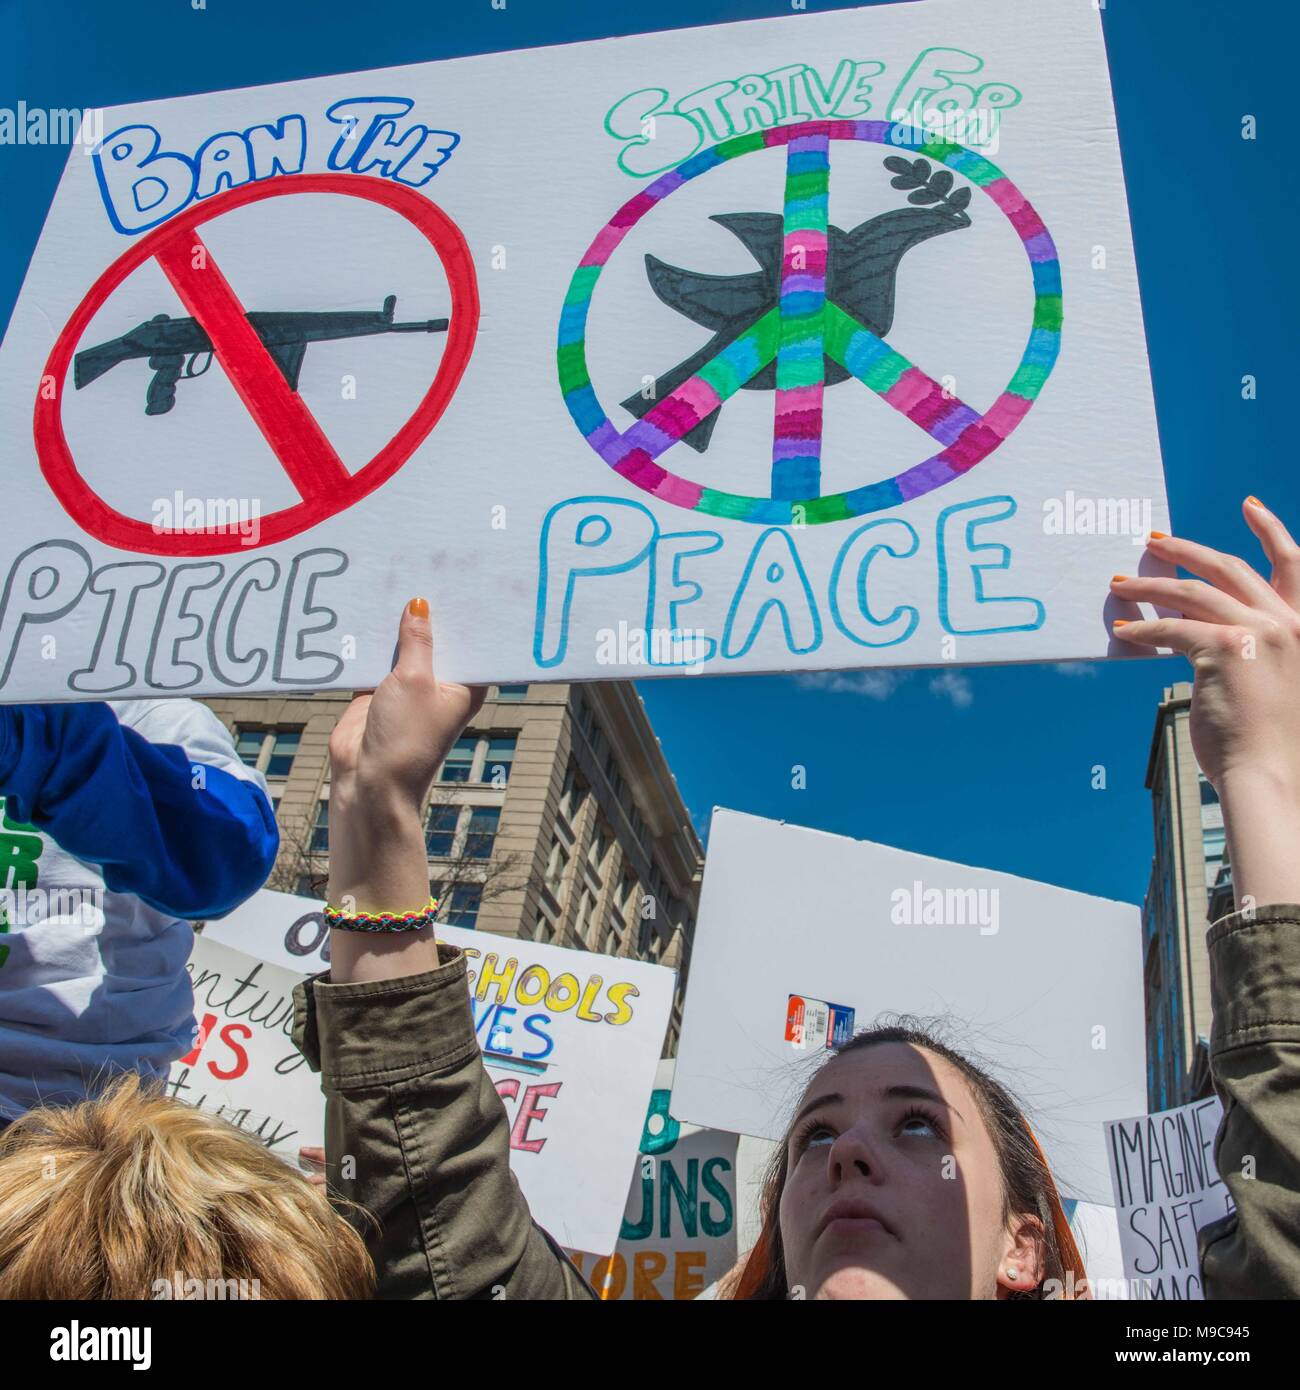 Scene from March for Our Lives gun control protest in Washington, D.C. on March 24, 2018 Stock Photo